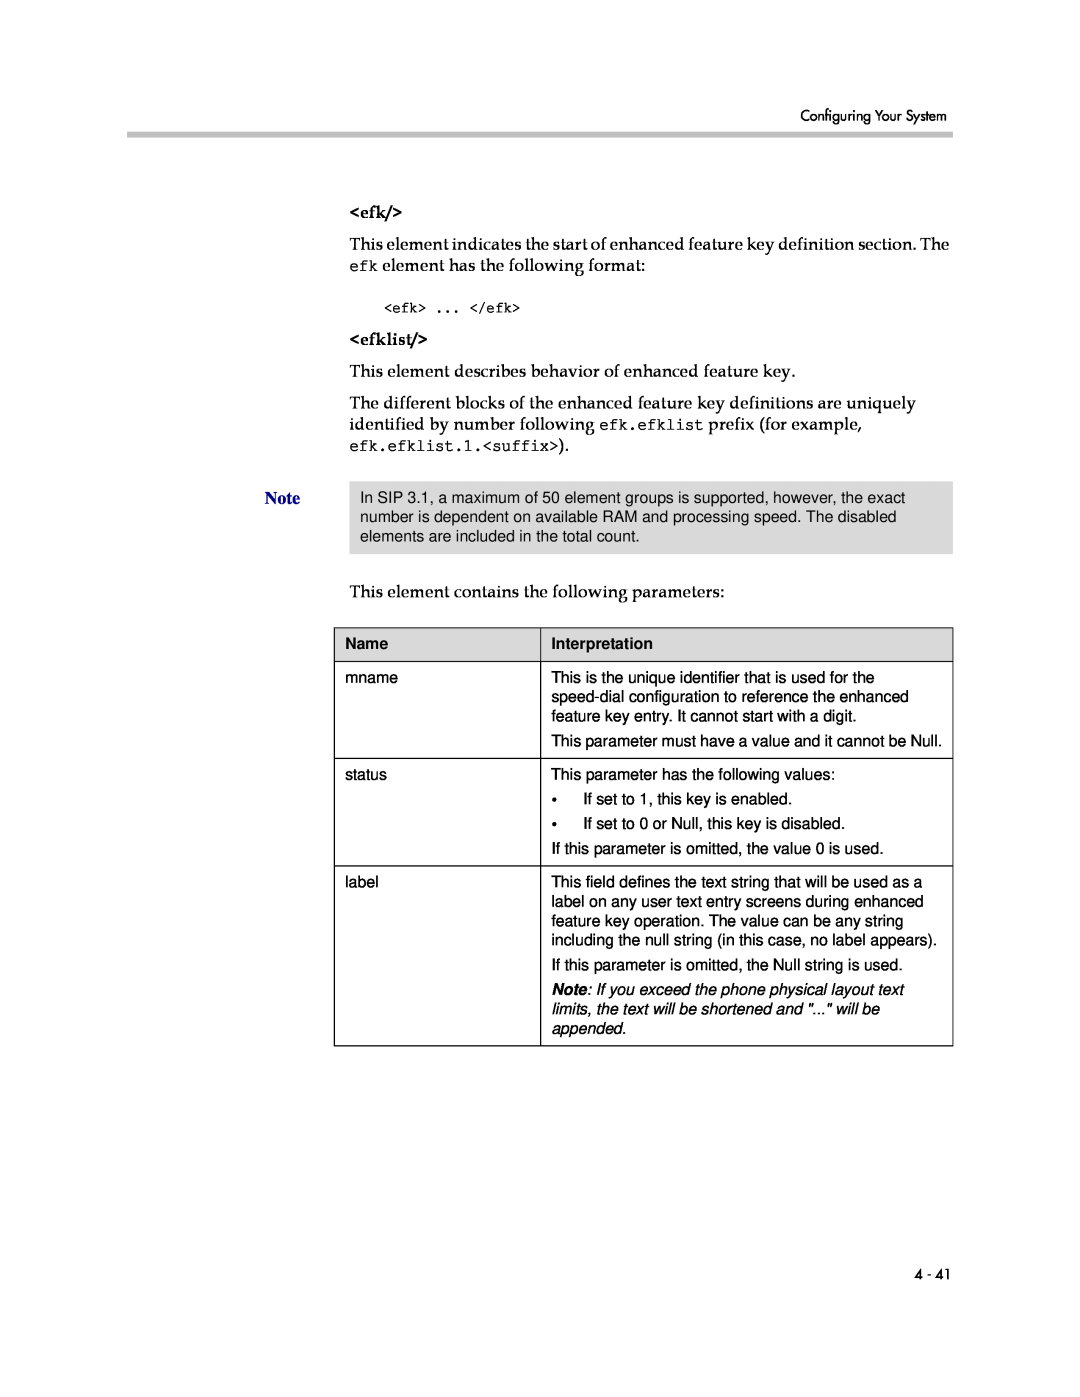 Polycom SIP 3.1 manual efklist, This element describes behavior of enhanced feature key, appended 